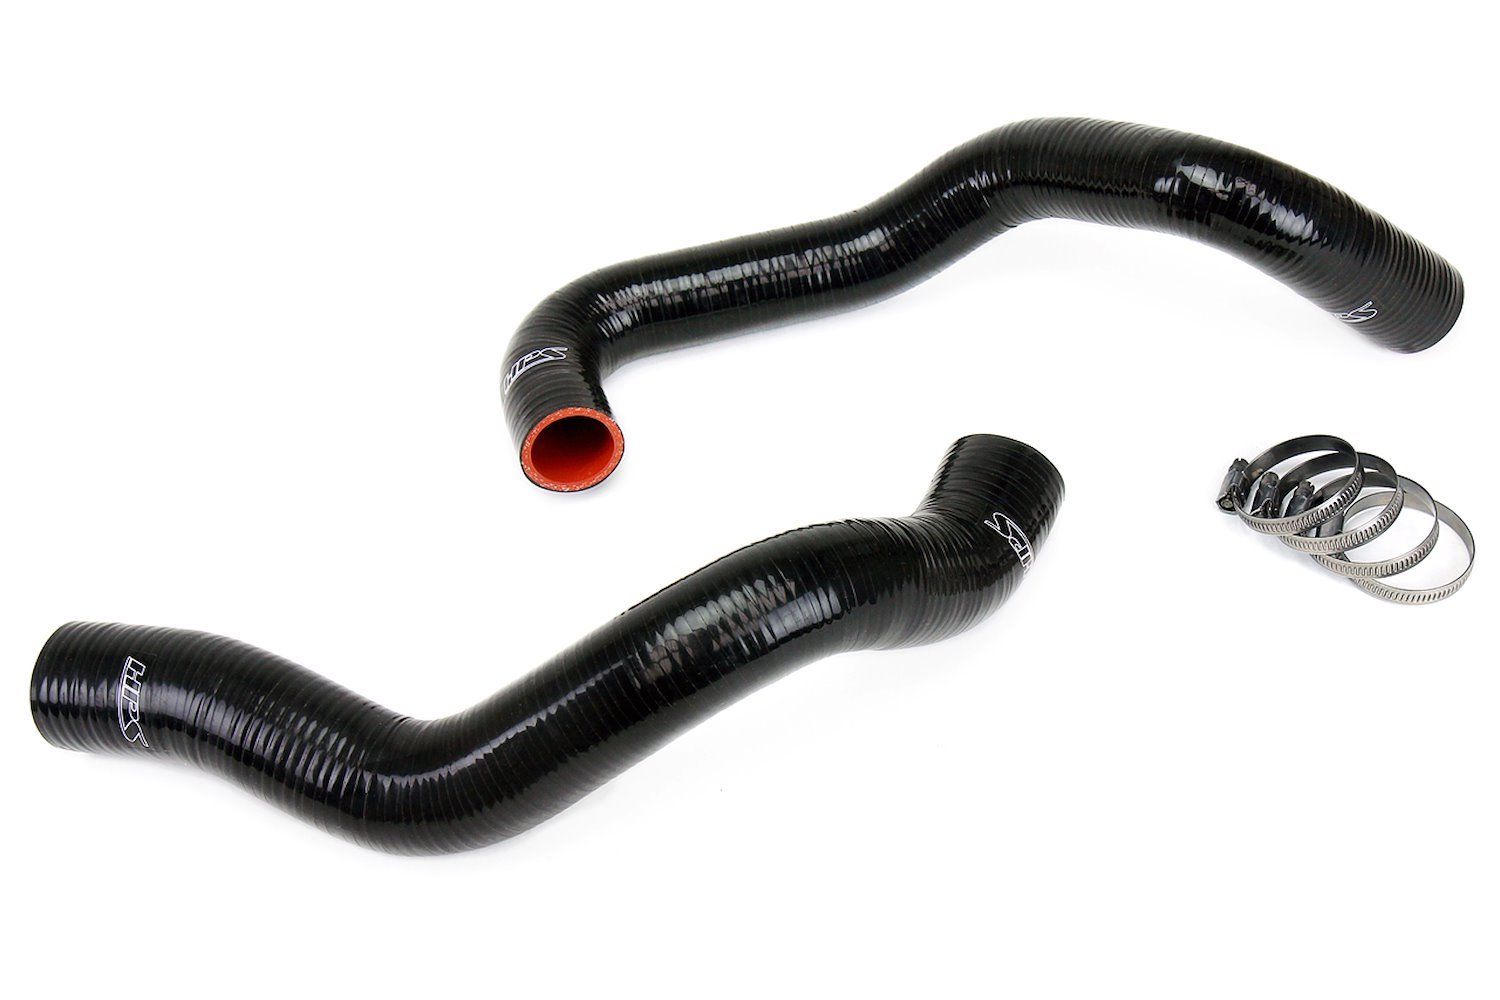 57-1011-BLK Radiator Hose Kit, High-Temp 3-Ply Reinforced Silicone, Replace OEM Rubber Radiator Coolant Hoses